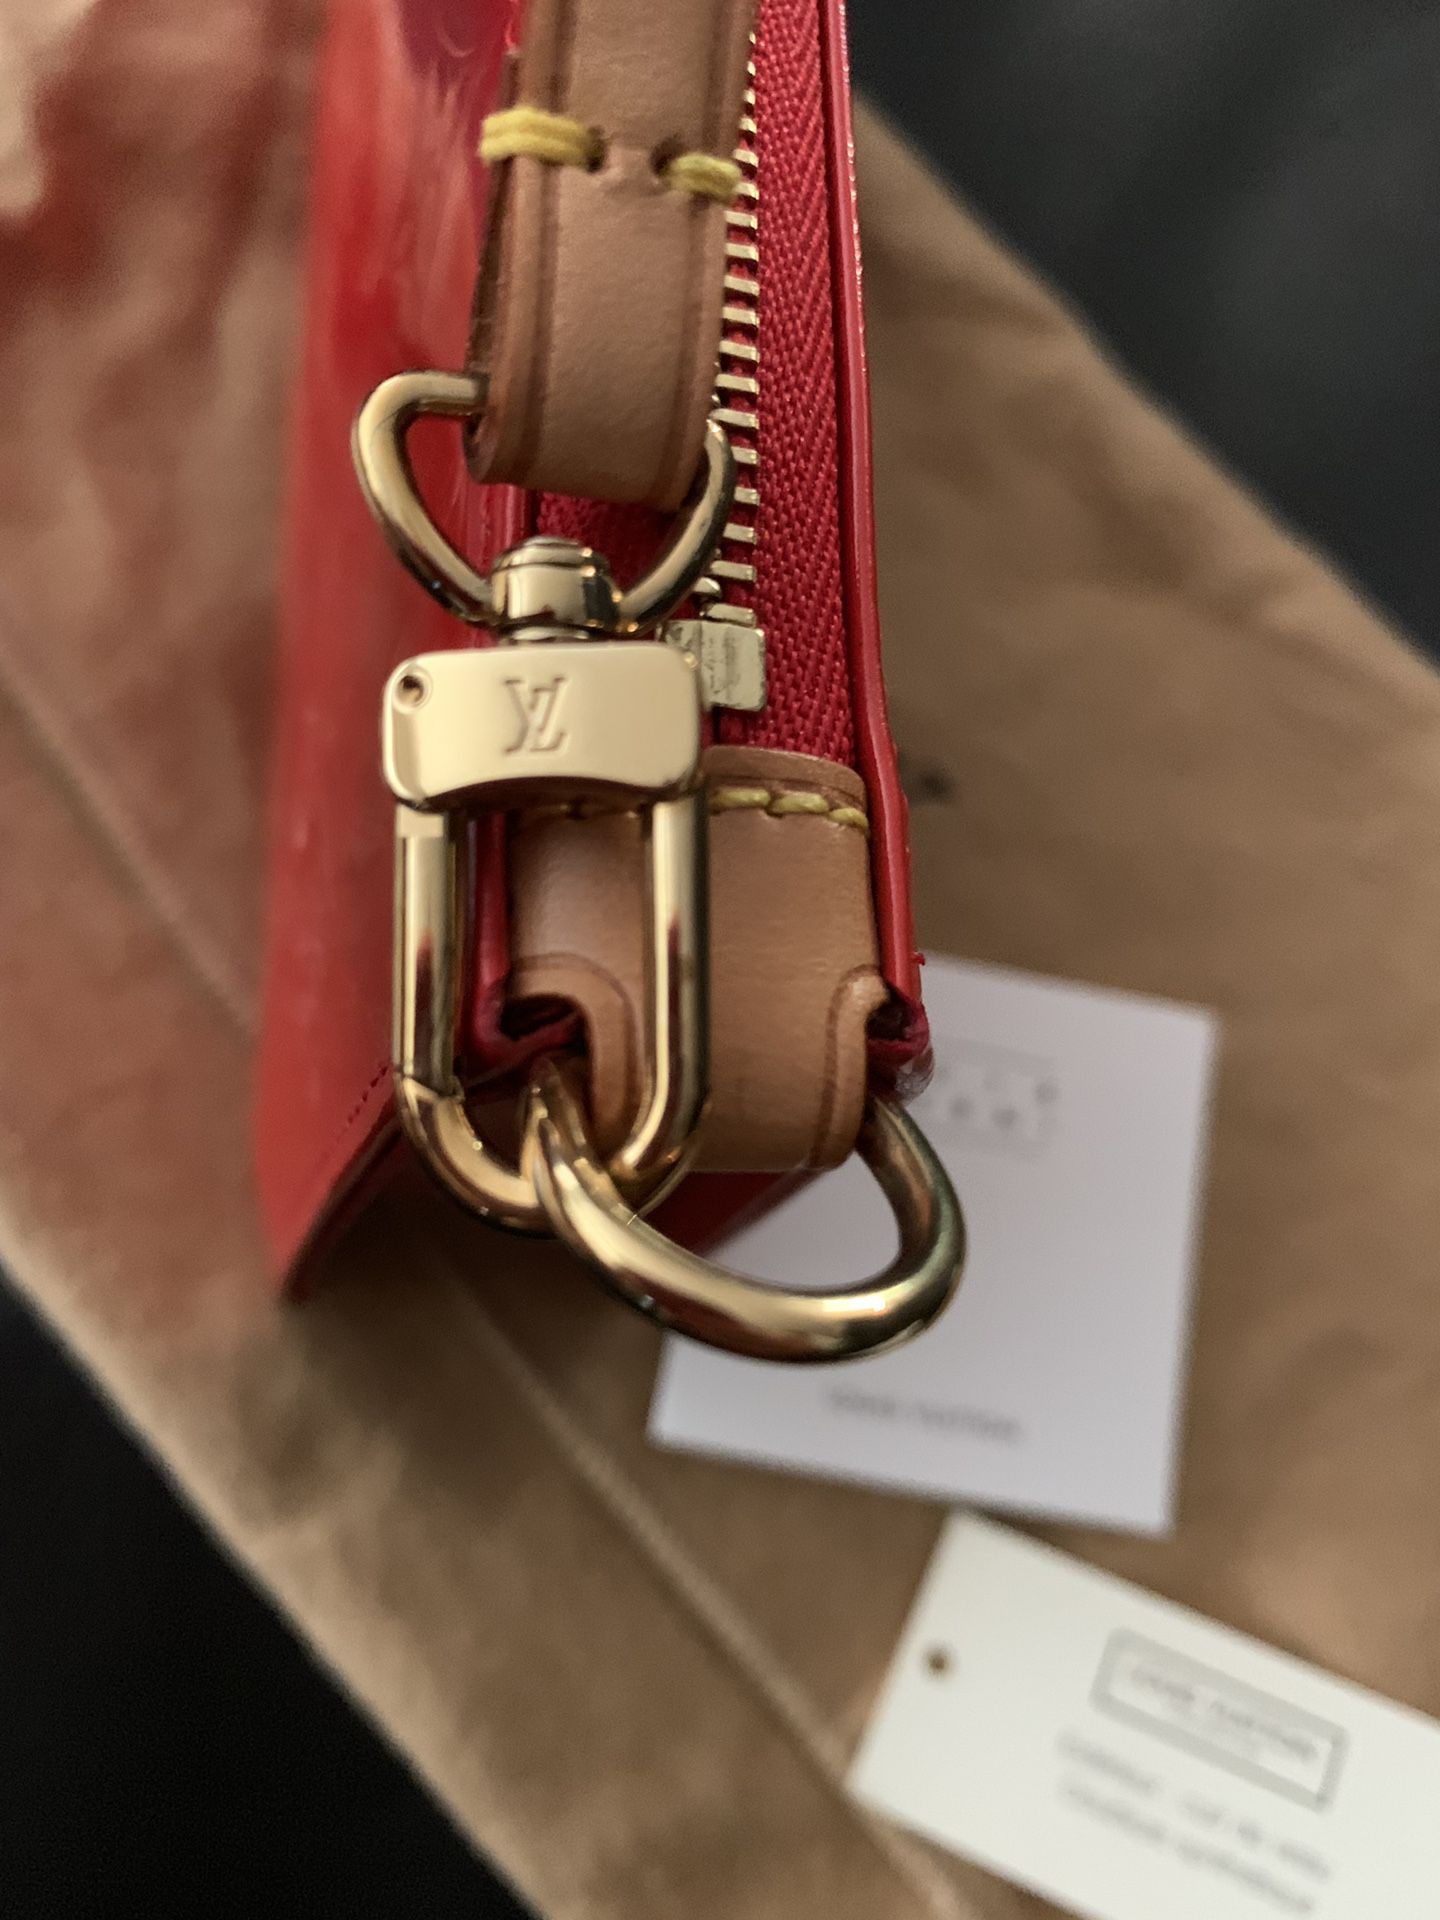 Louis Vuitton Lexington red vernis - Authentic and Brand New for Sale in  Los Angeles, CA - OfferUp